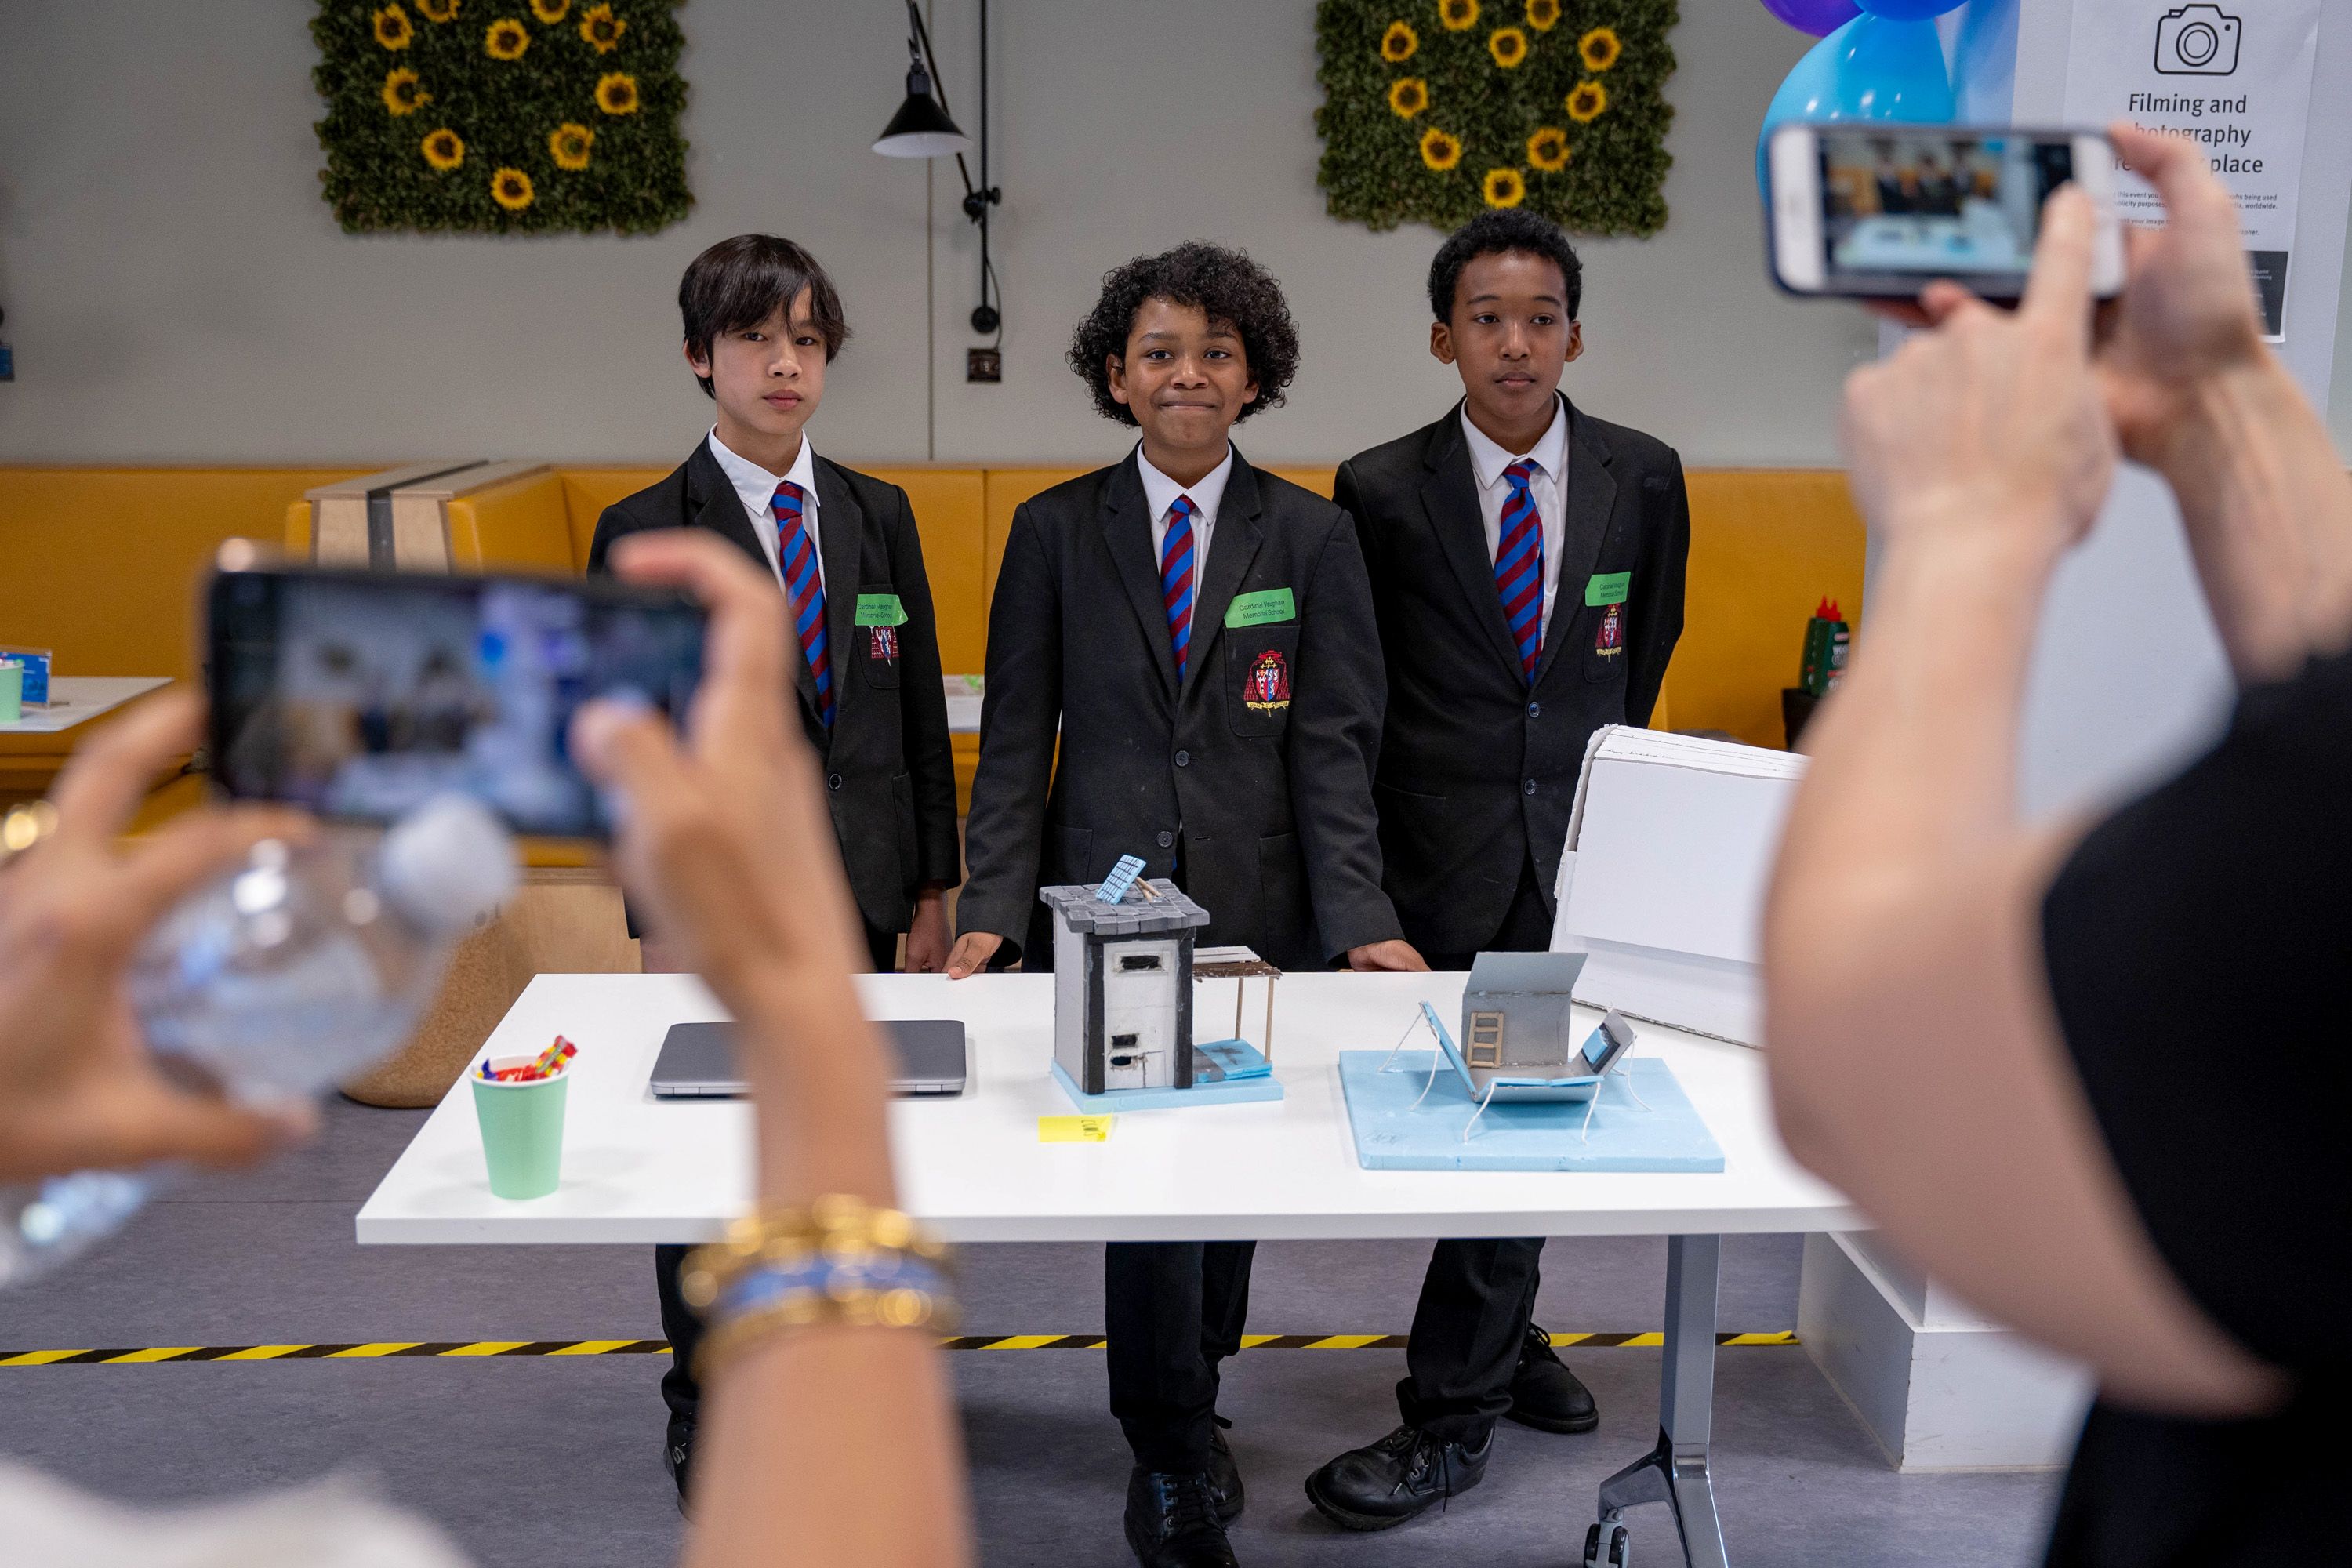 Three boys in school uniform stand proudly behind a table where there inventions are laid out, while in the foreground we see the phones of people taking photos of them